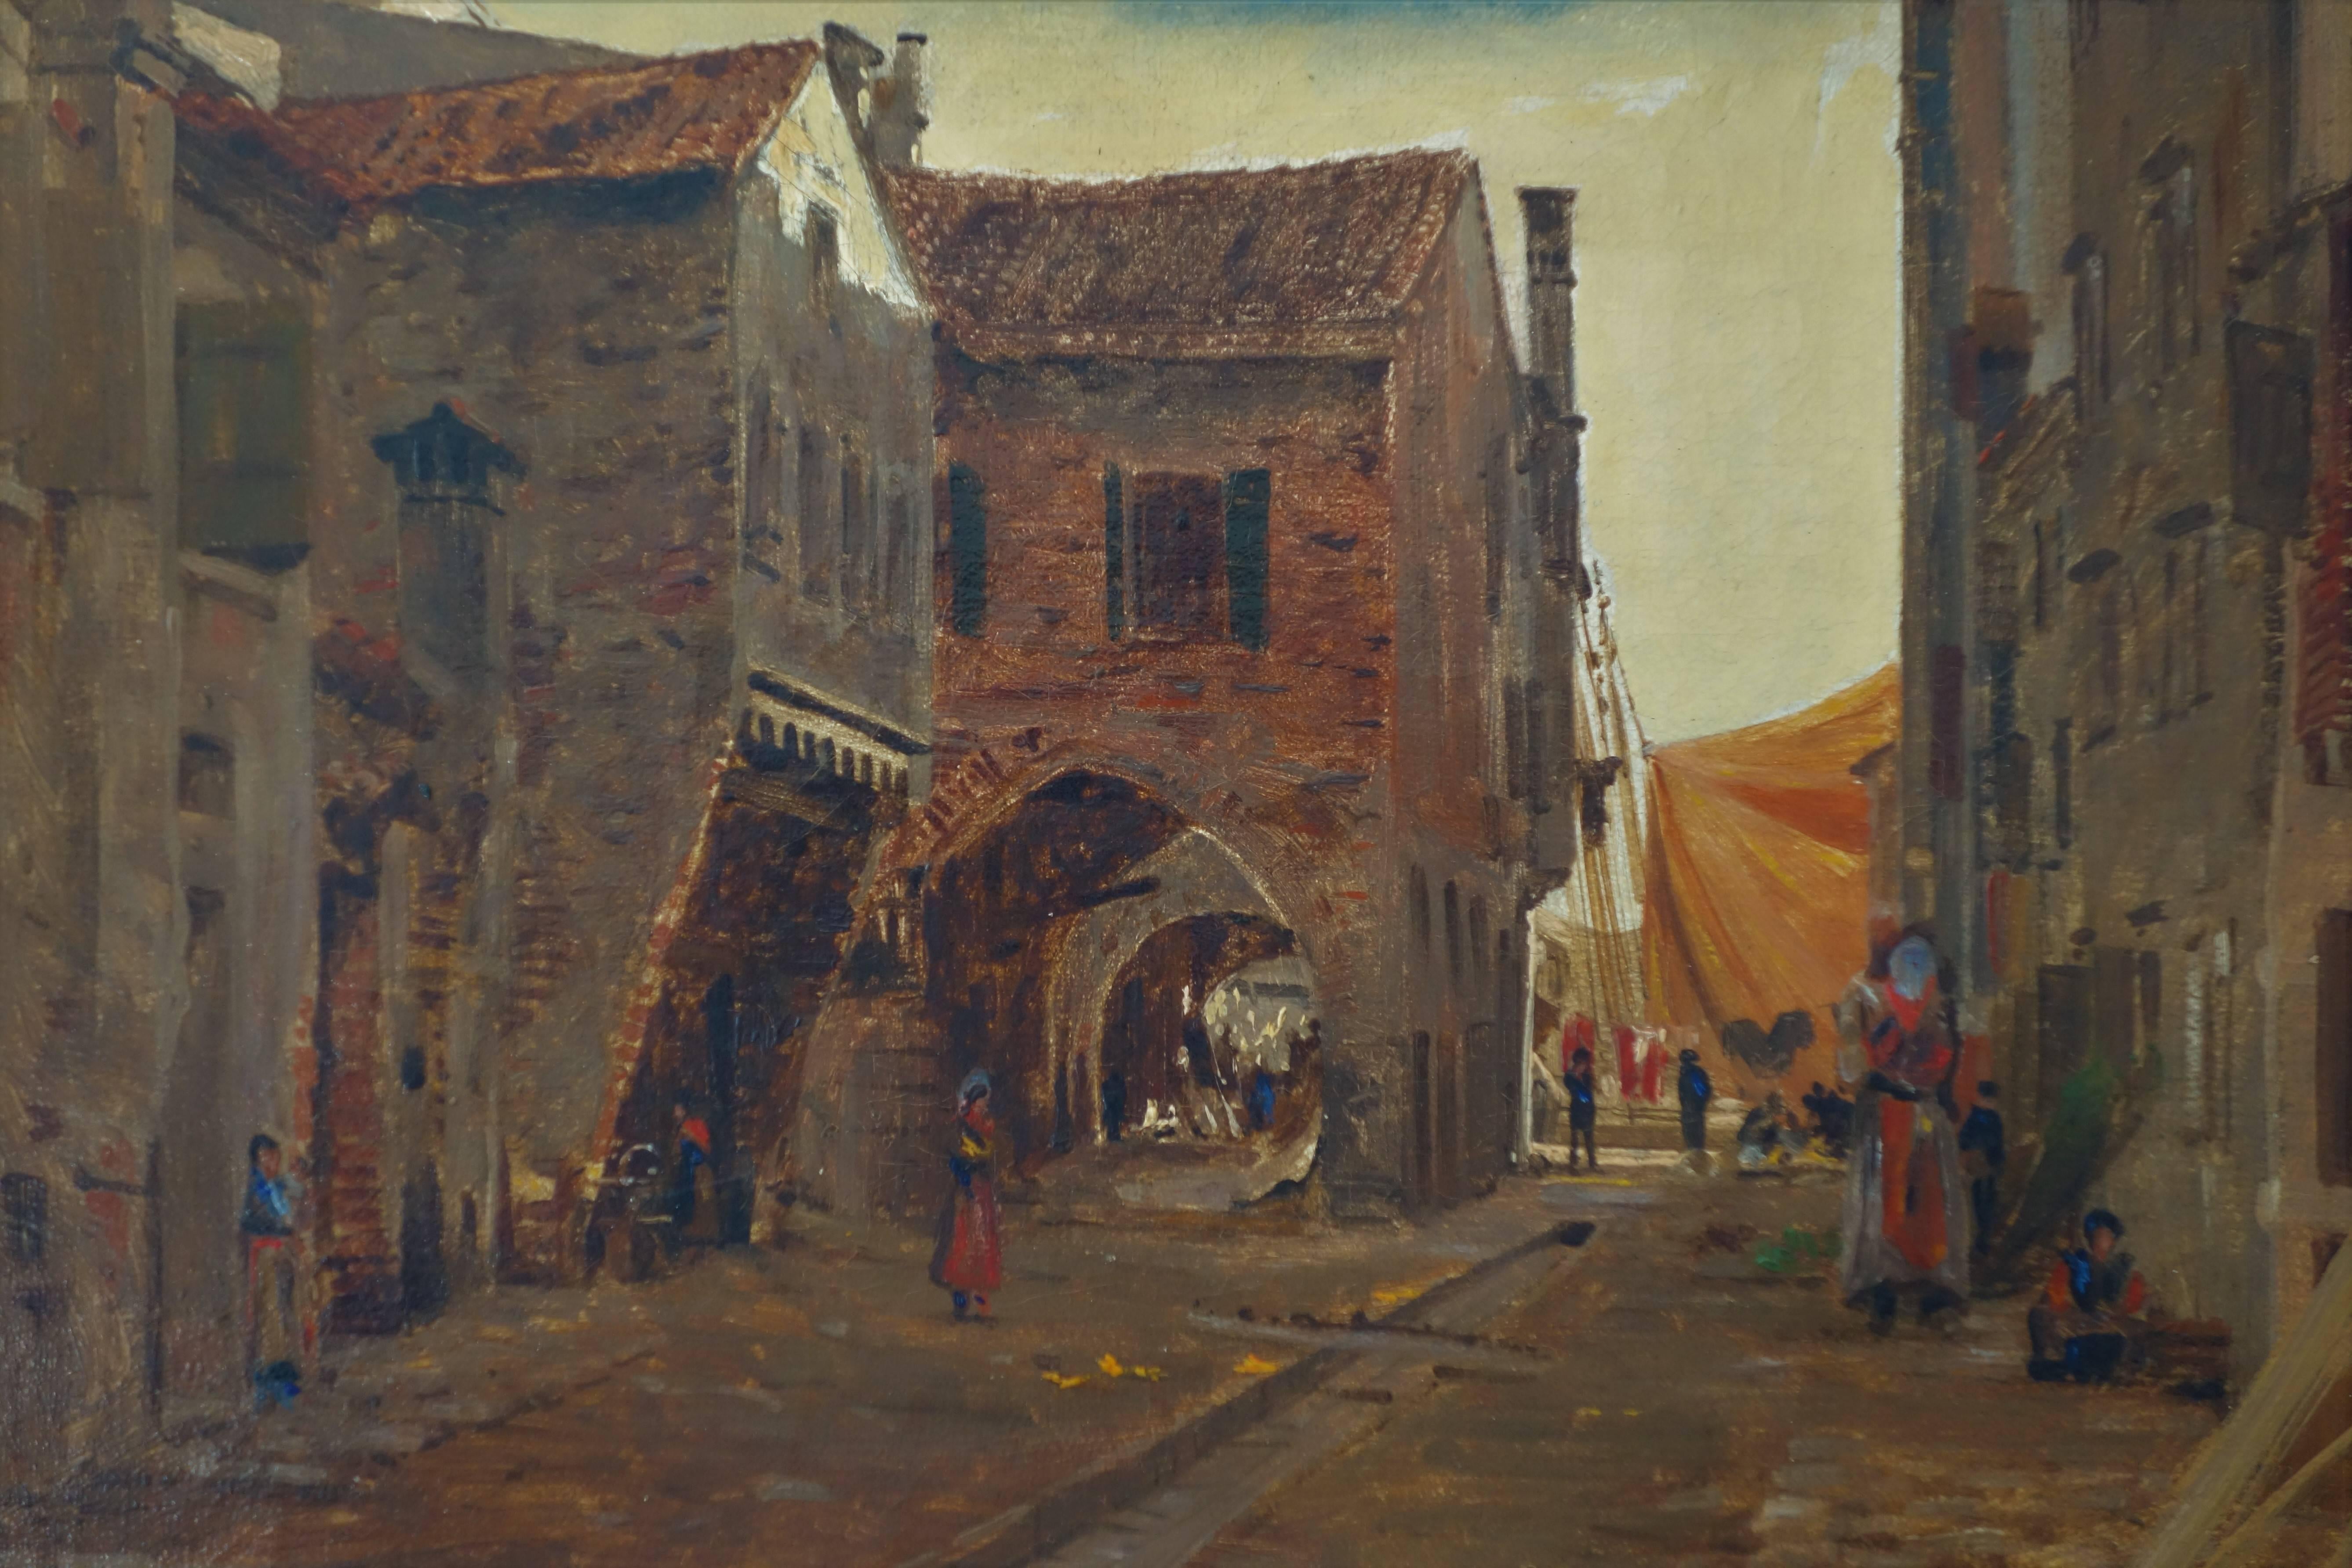 Painting by I.T. Hansen (1848 -1912) signed on the back: I. Th. Hansen, Gade i Chioggia ved Venedig 1889 (I. Th. Hansen, Street in Chioggia by Venice 1889).
Dimensions: 41.5 cm x 31 cm. / 16.34 in x 12.21 in.
Josef Theodor Hansen was a Danish